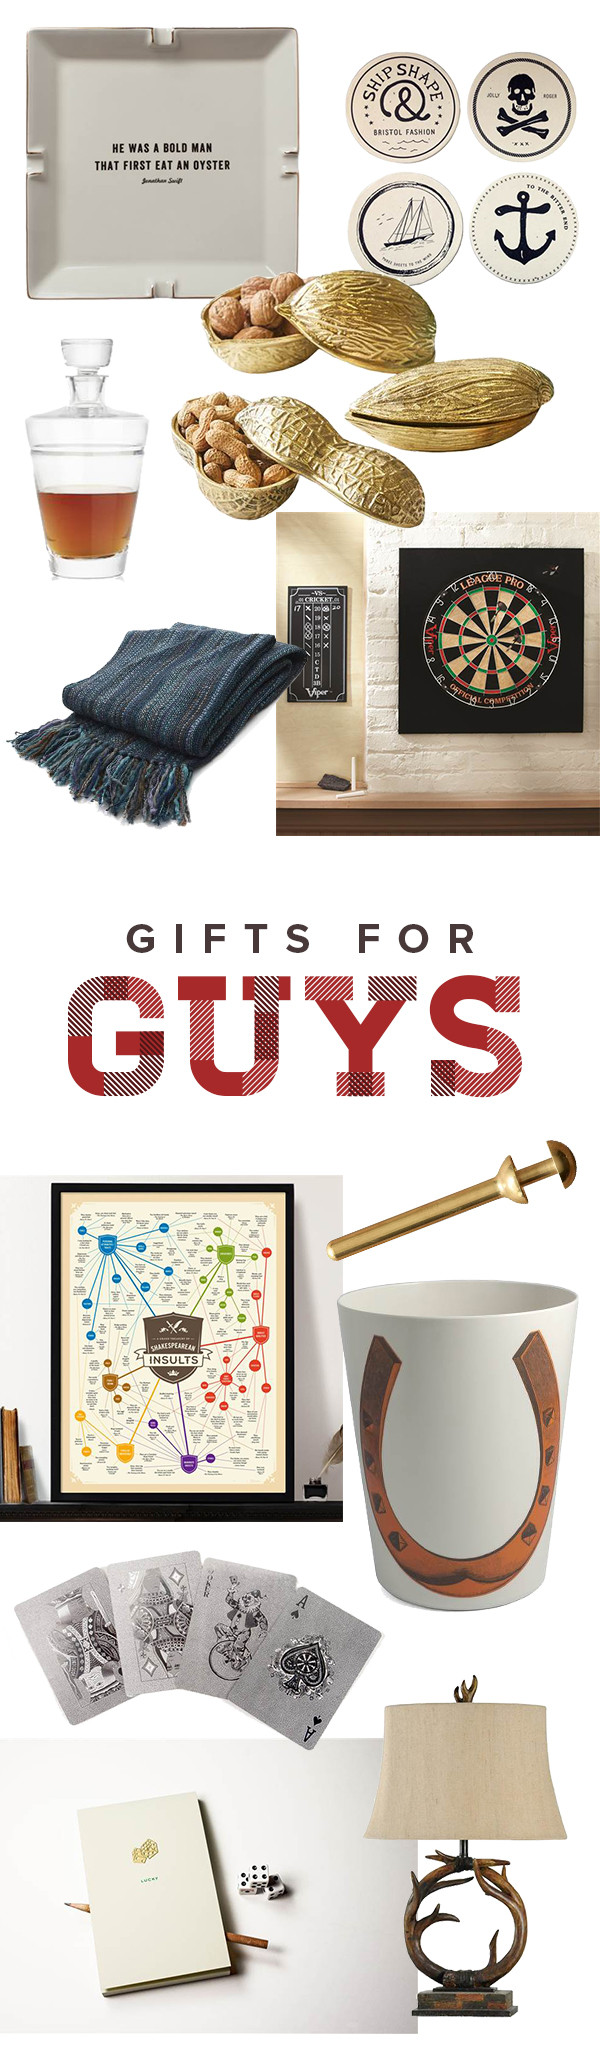 Man Cave Christmas Gifts
 Gifts for him The 22 best presents for the modern man cave